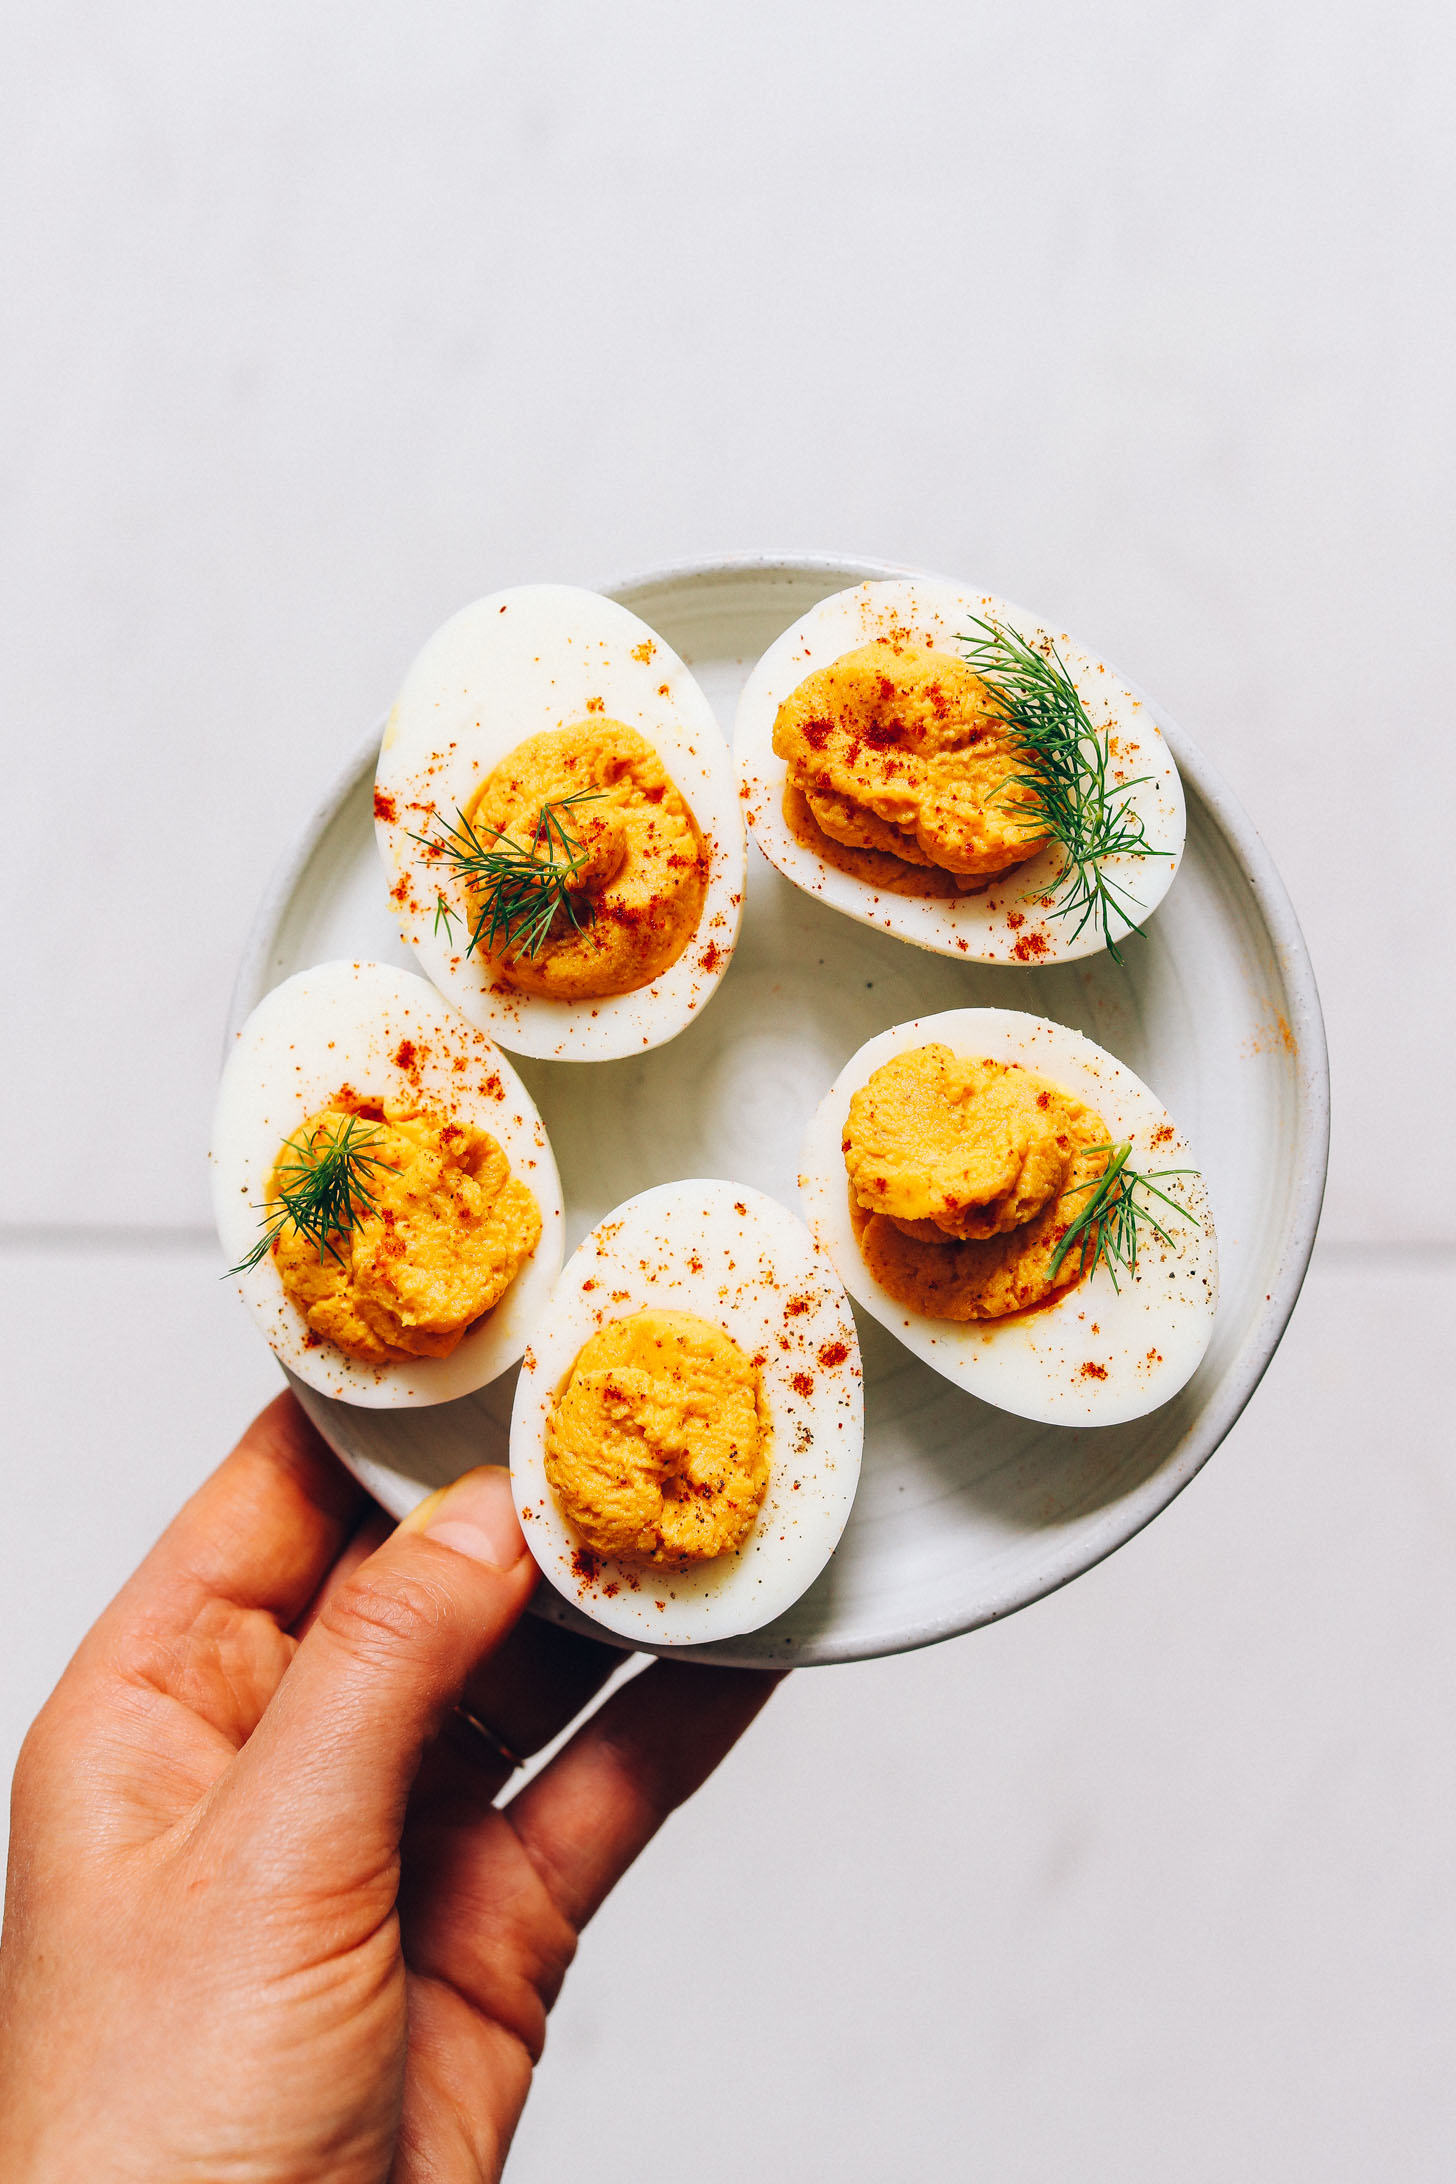 Plate of Mayo-Free Deviled Eggs topped with paprika and fresh dill